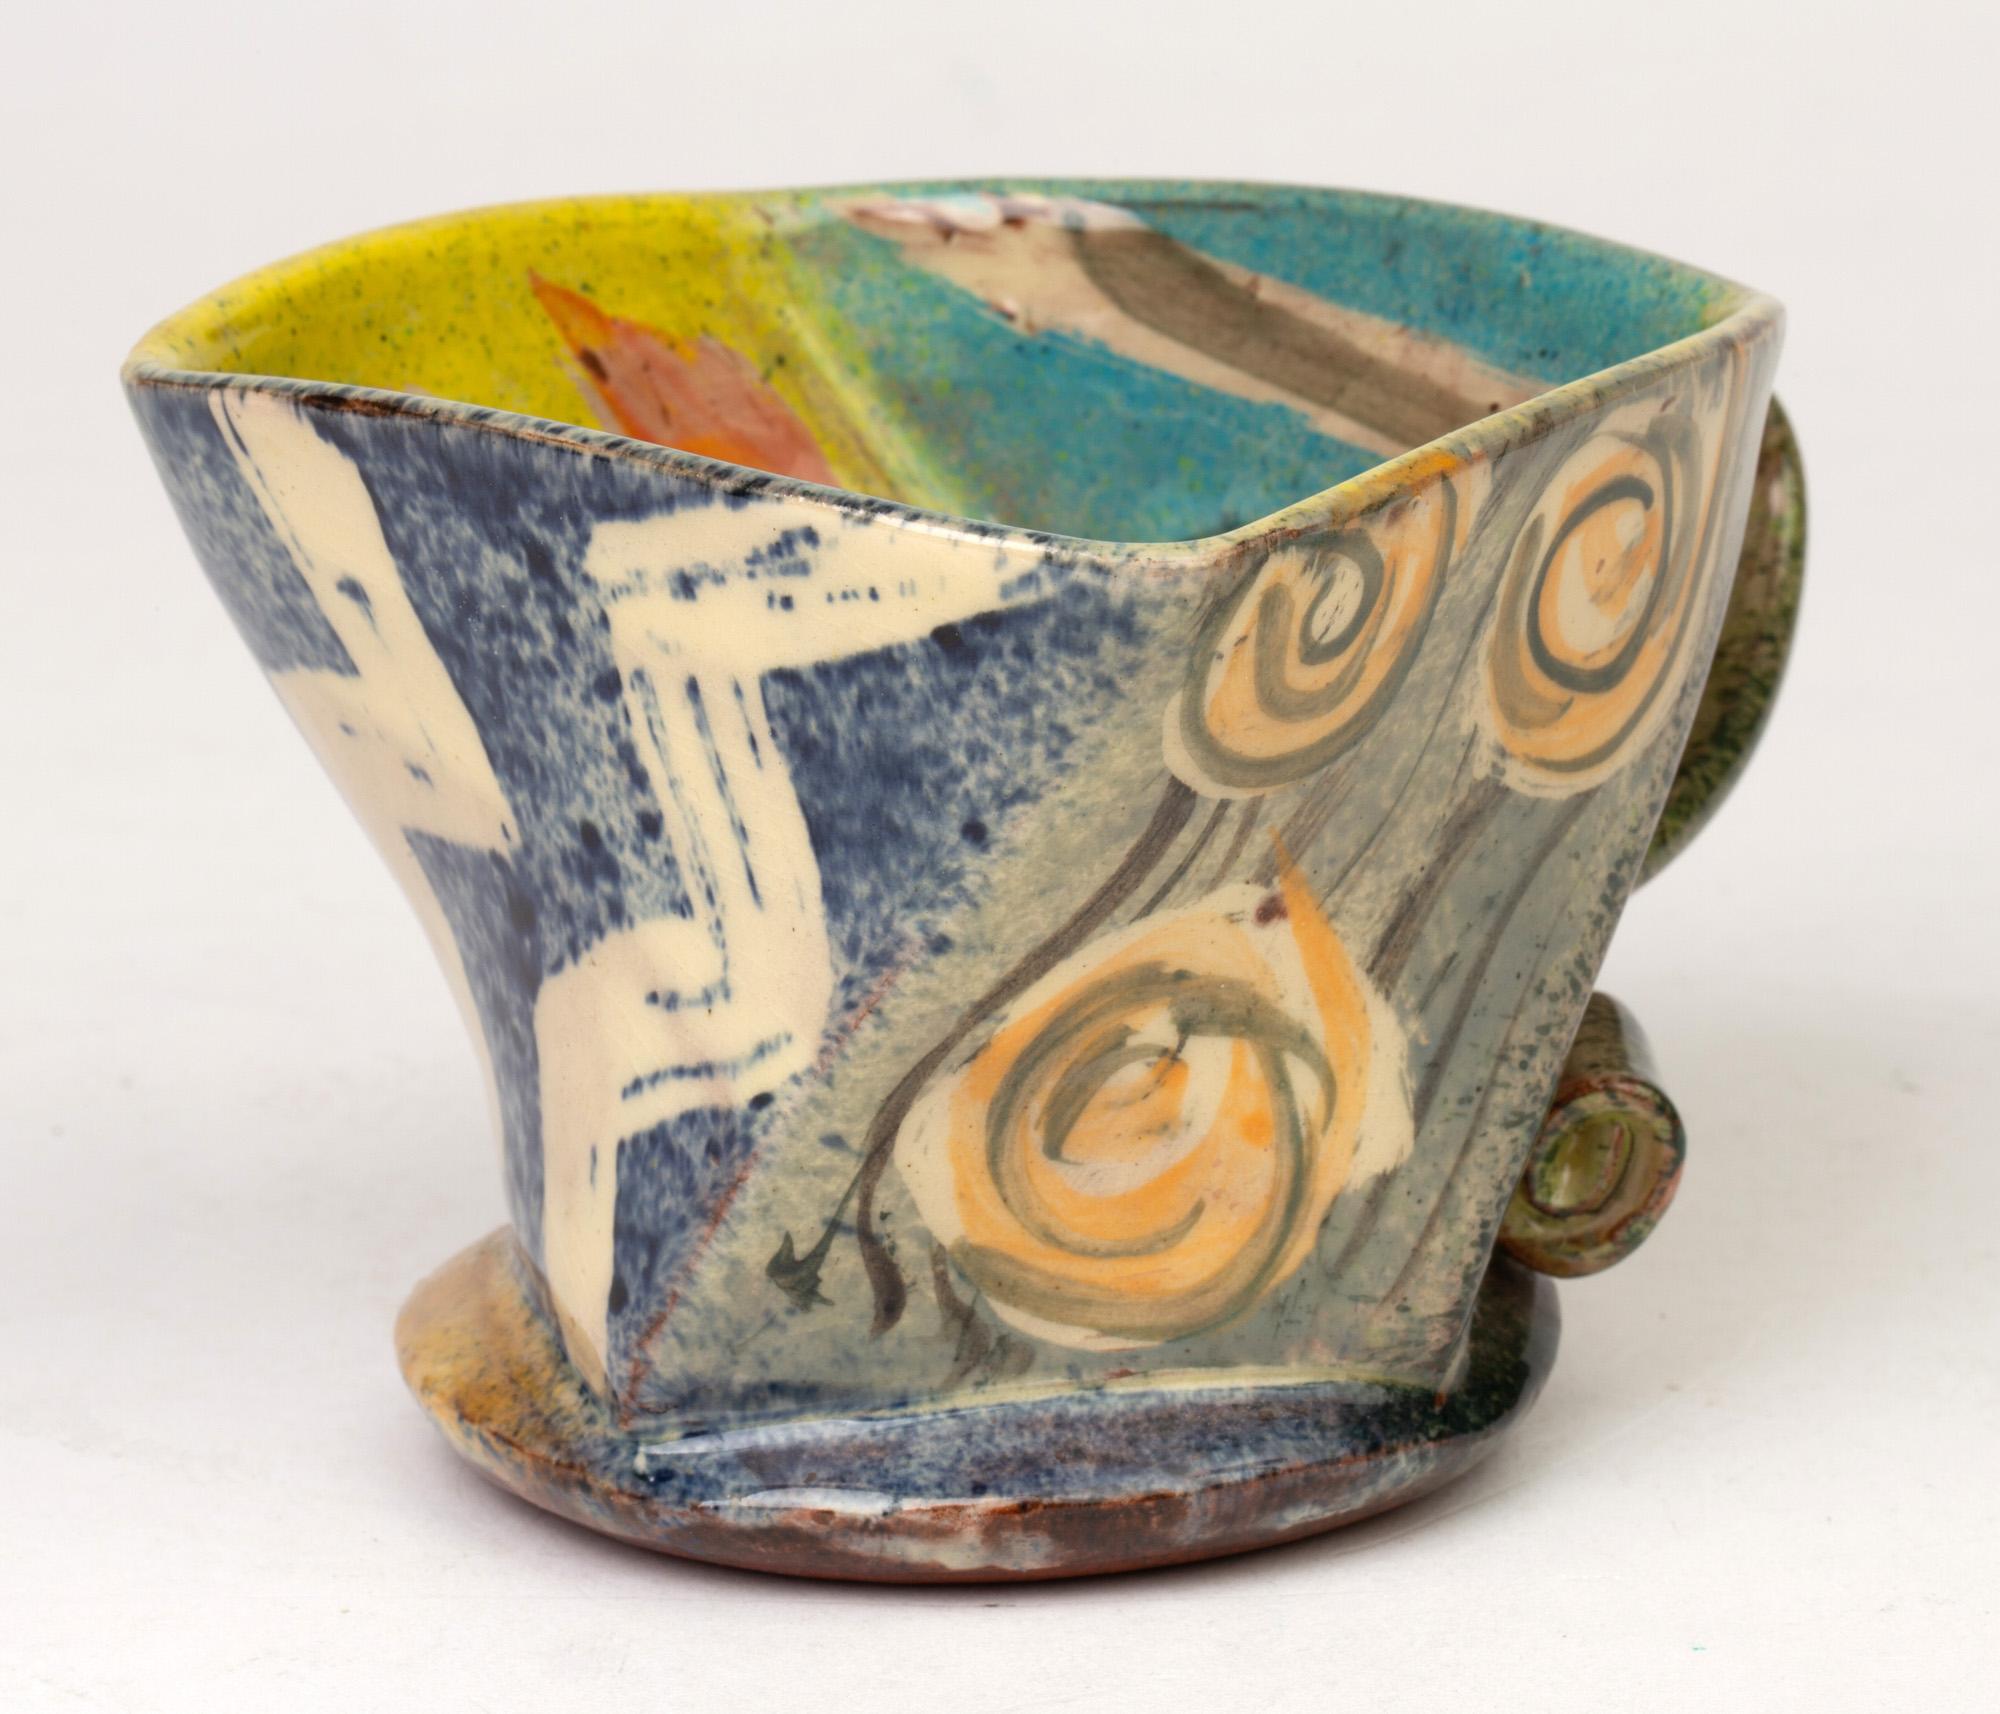 From an extensive collection of studio pottery we are pleased to offer this fine abstract form studio pottery mug by Cornish based potter Paul Northmore Jackson dated 1993. The mug of twisted square shape has a rounded base and flat strap handle